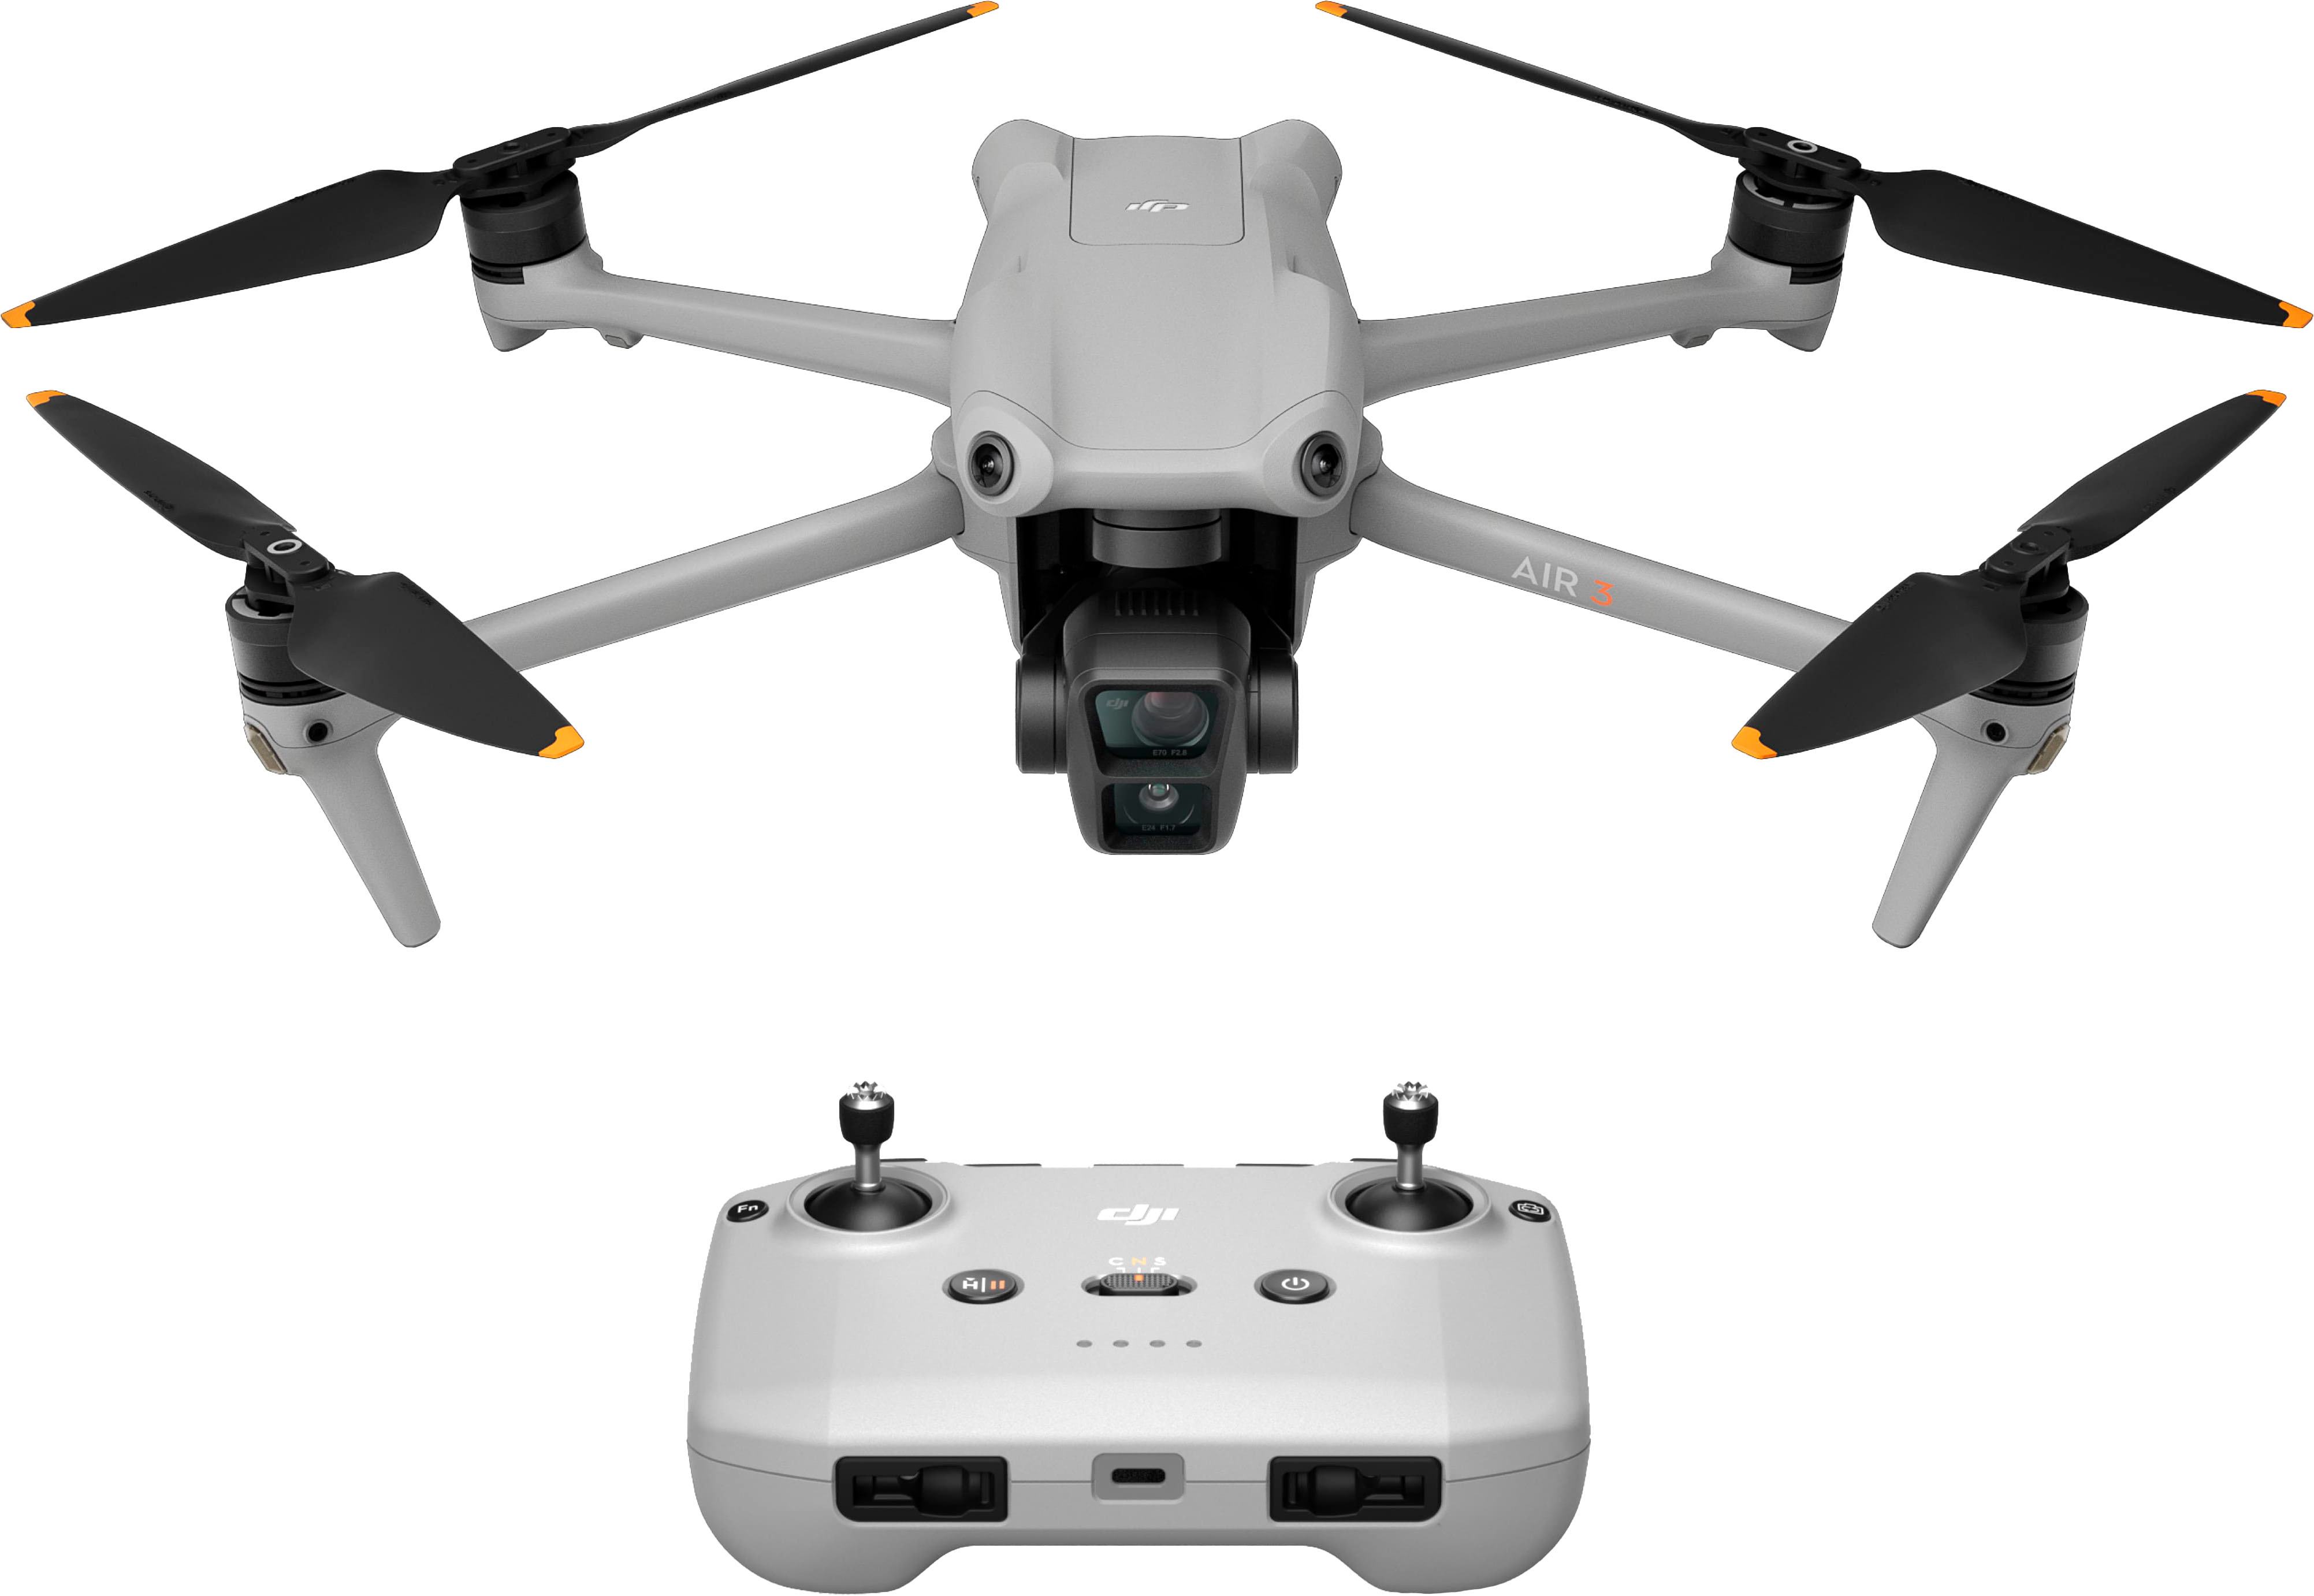 DJI Mini 3 Pro review  43 facts and highlights